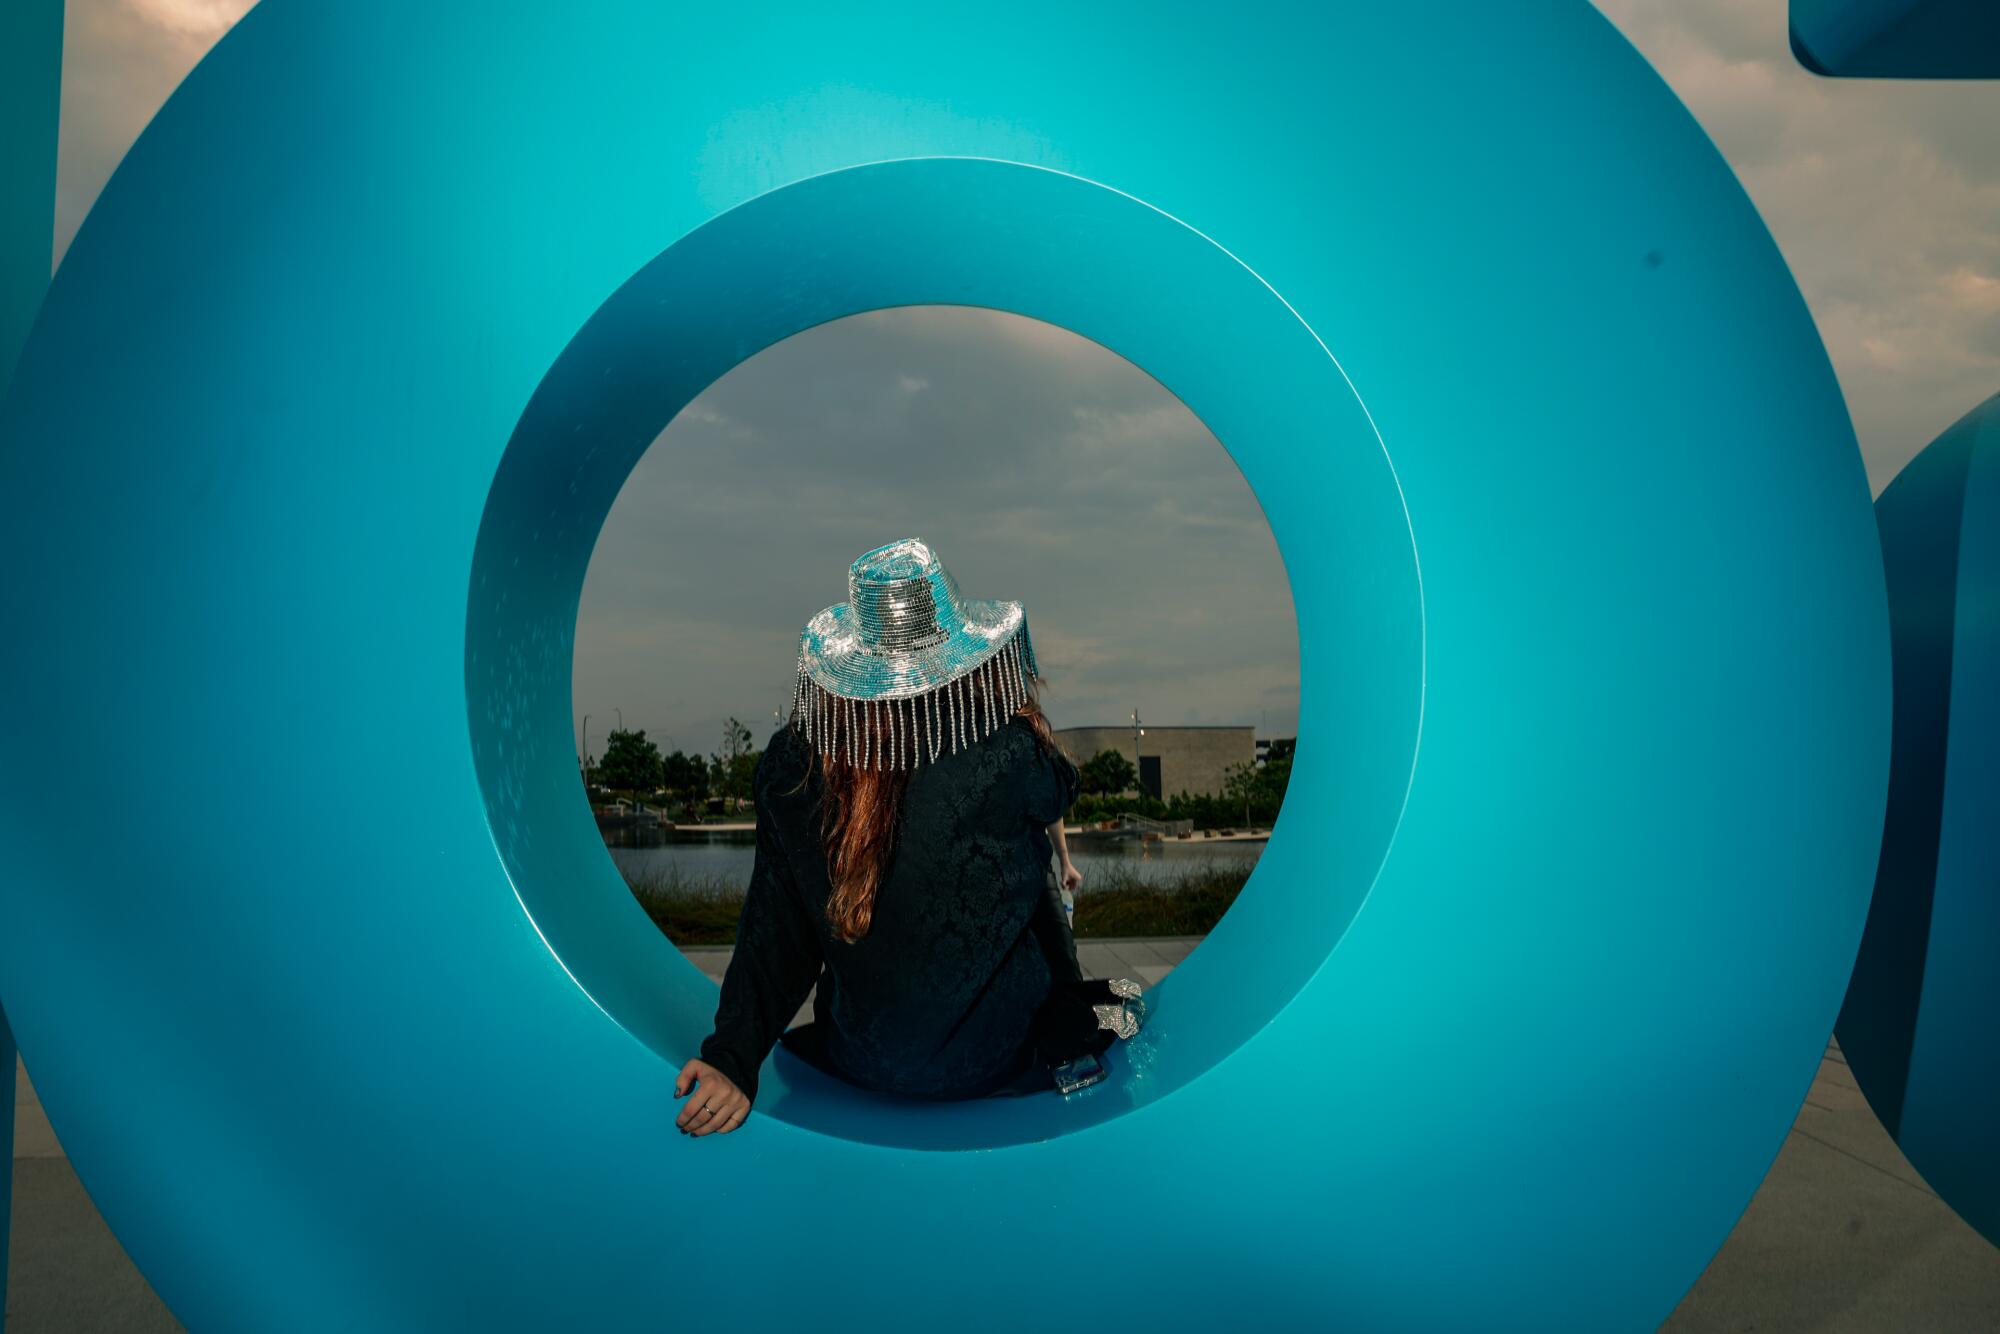 A woman in silver fringed hat poses inside a large blue letter O, part of a sign.